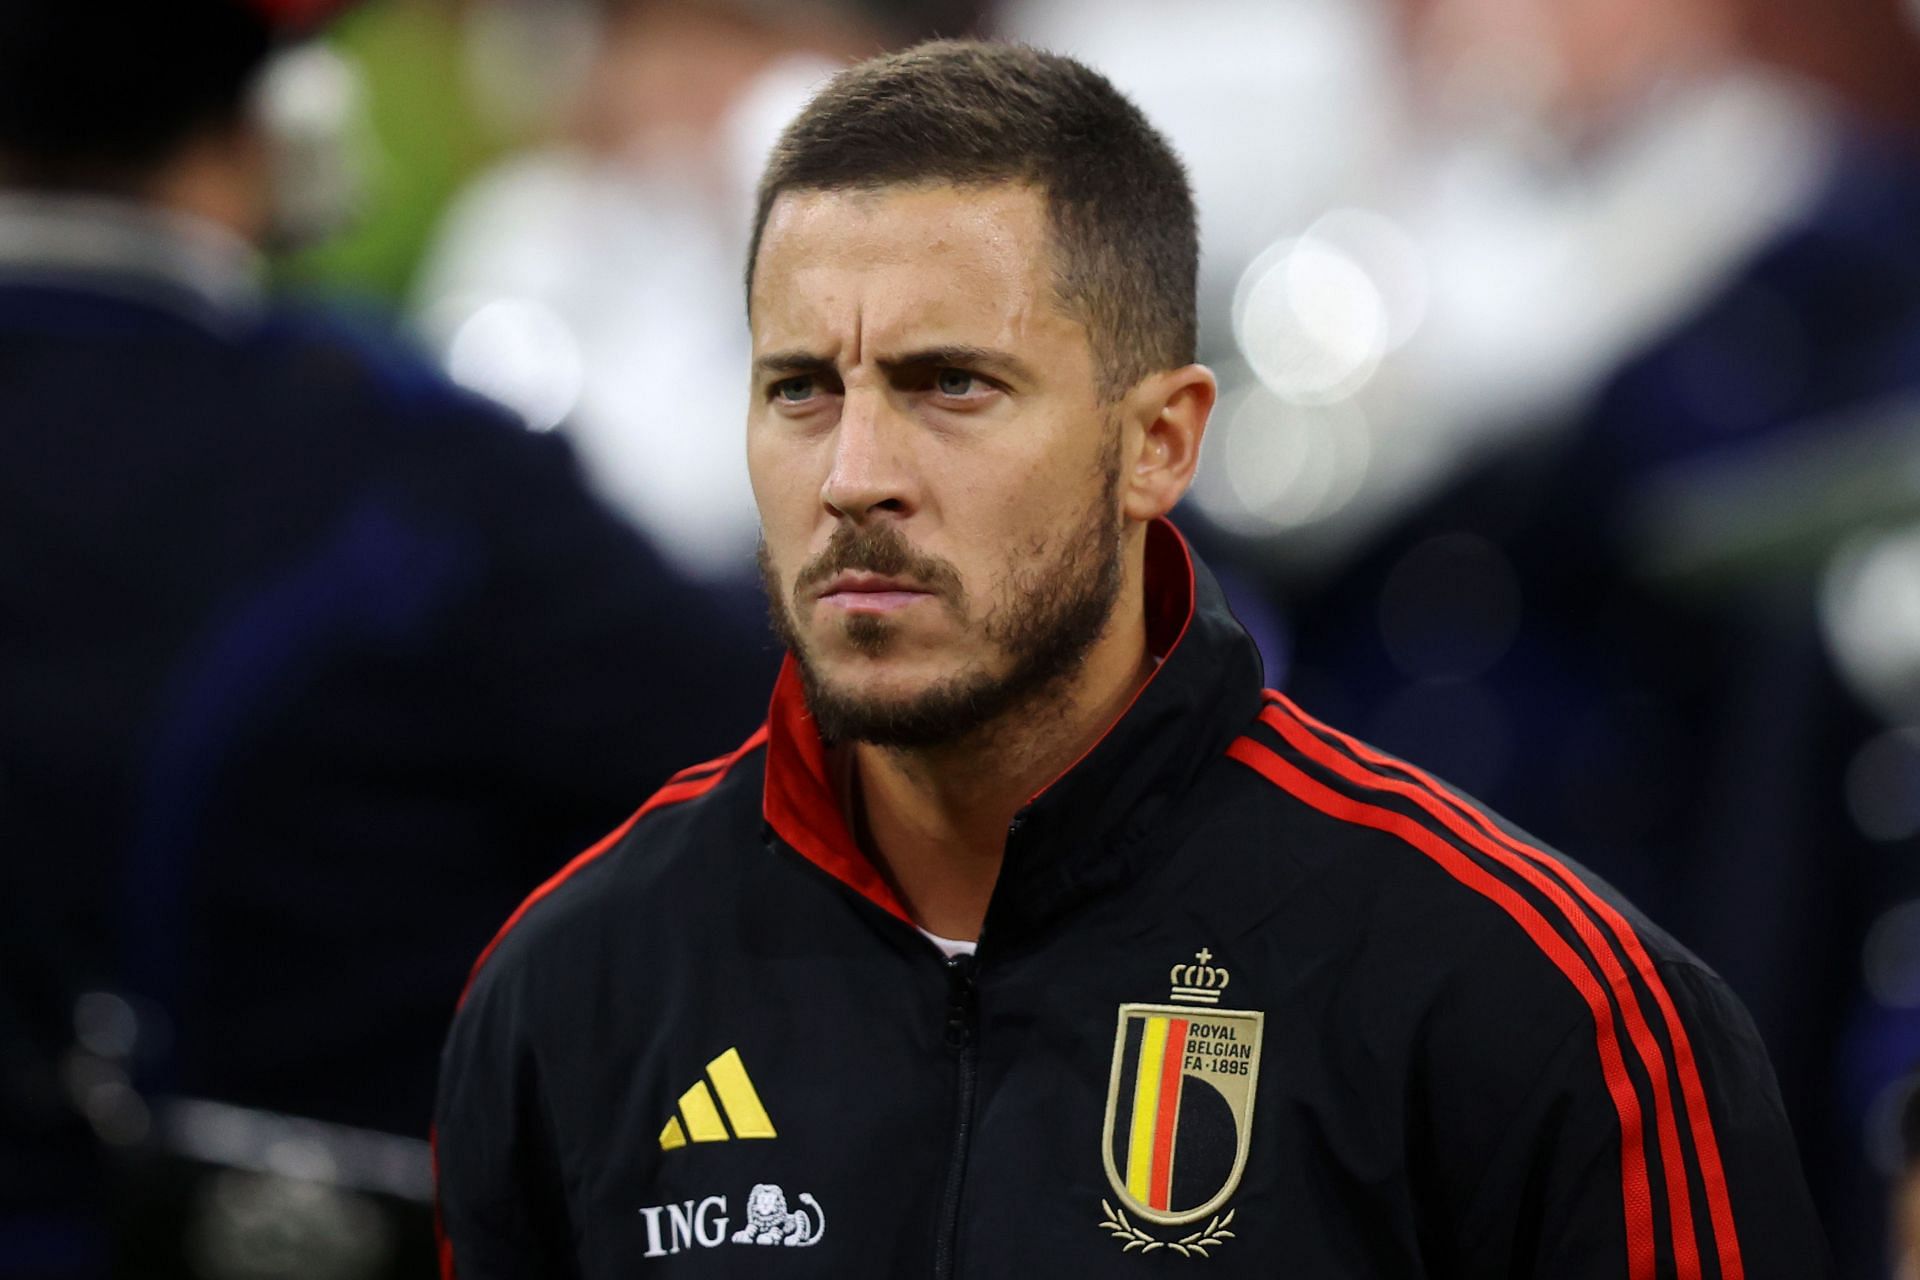 Hazard will be hoping to guide Belgium to victory at the World Cup in Qatar